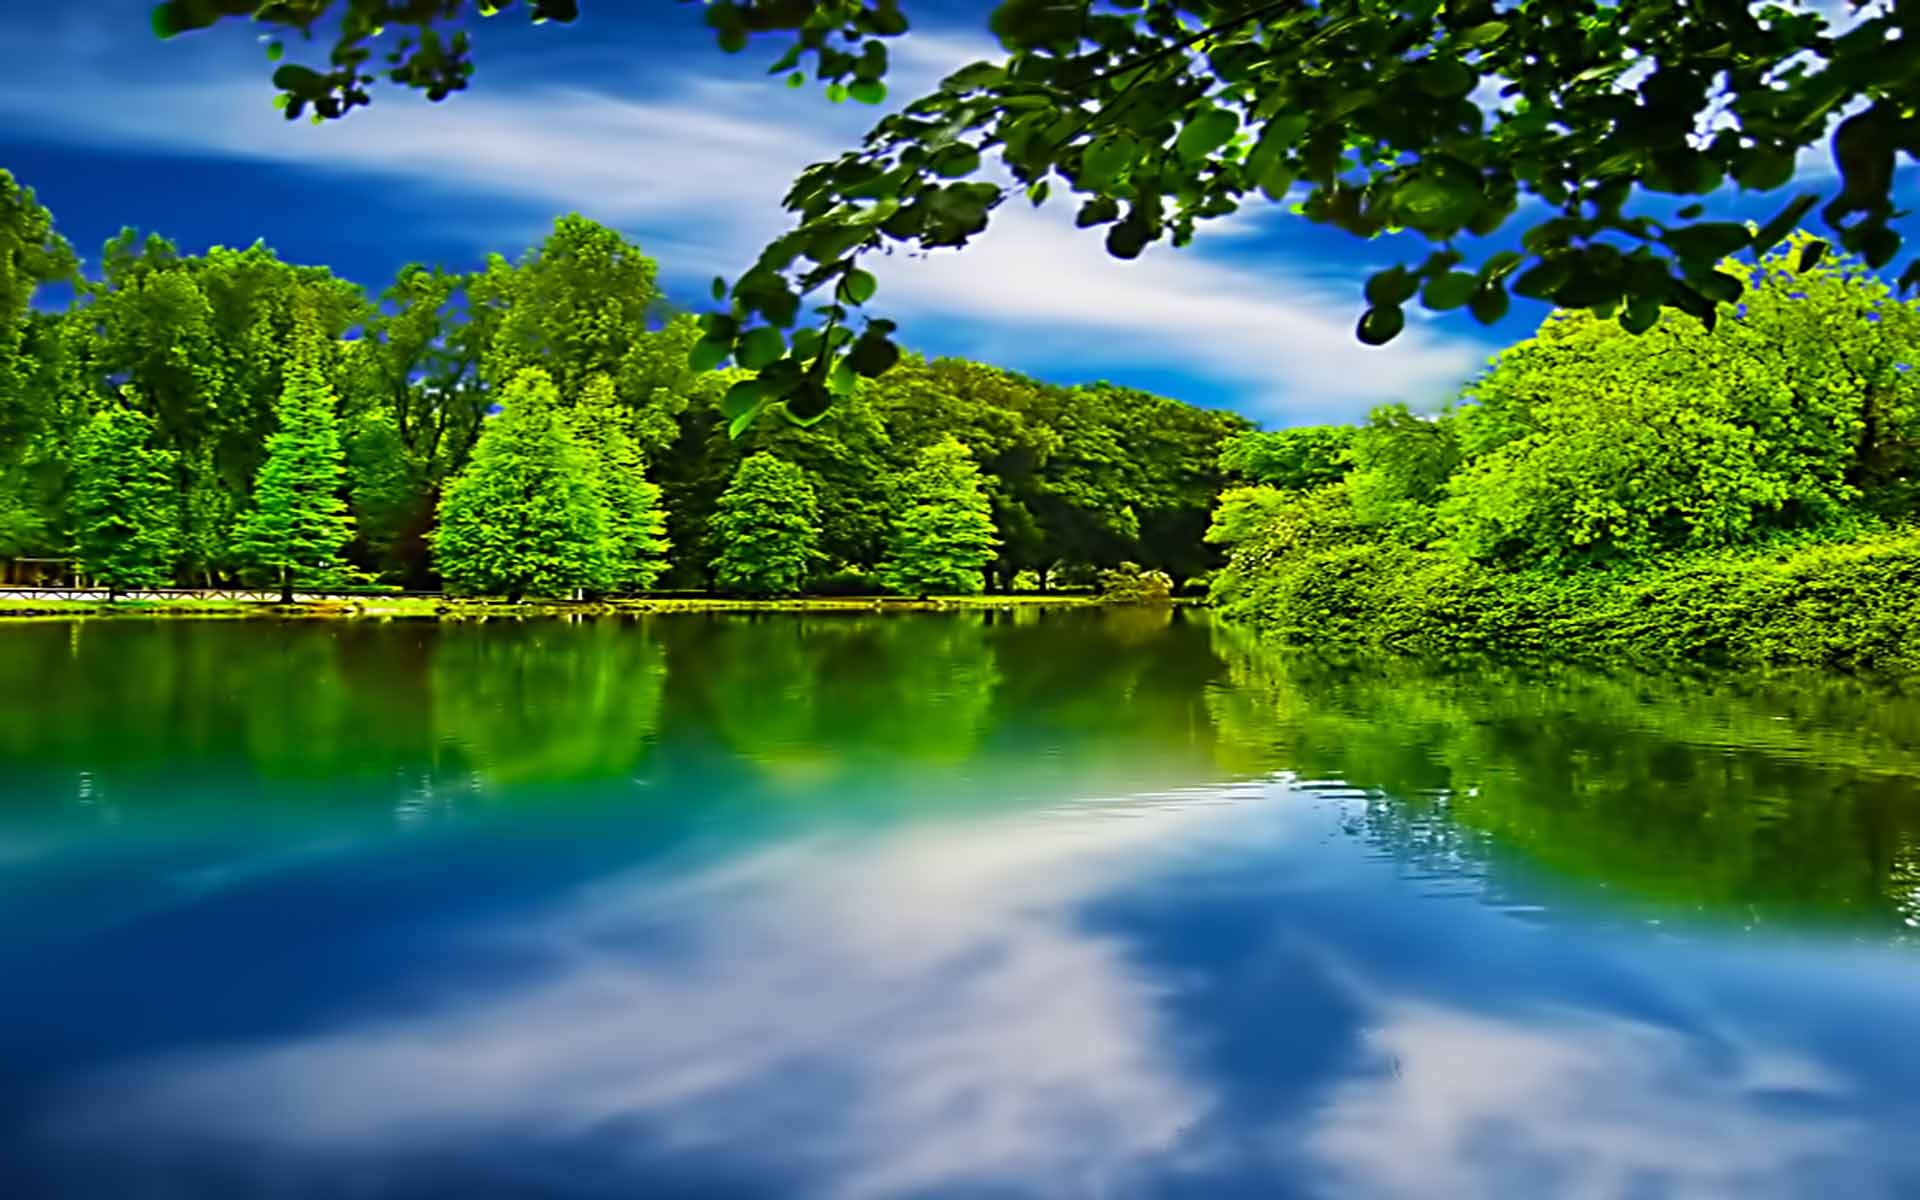 Lakes: Peaceful Lake Forest Reflection Blue Green Calm Wallpaper For ...